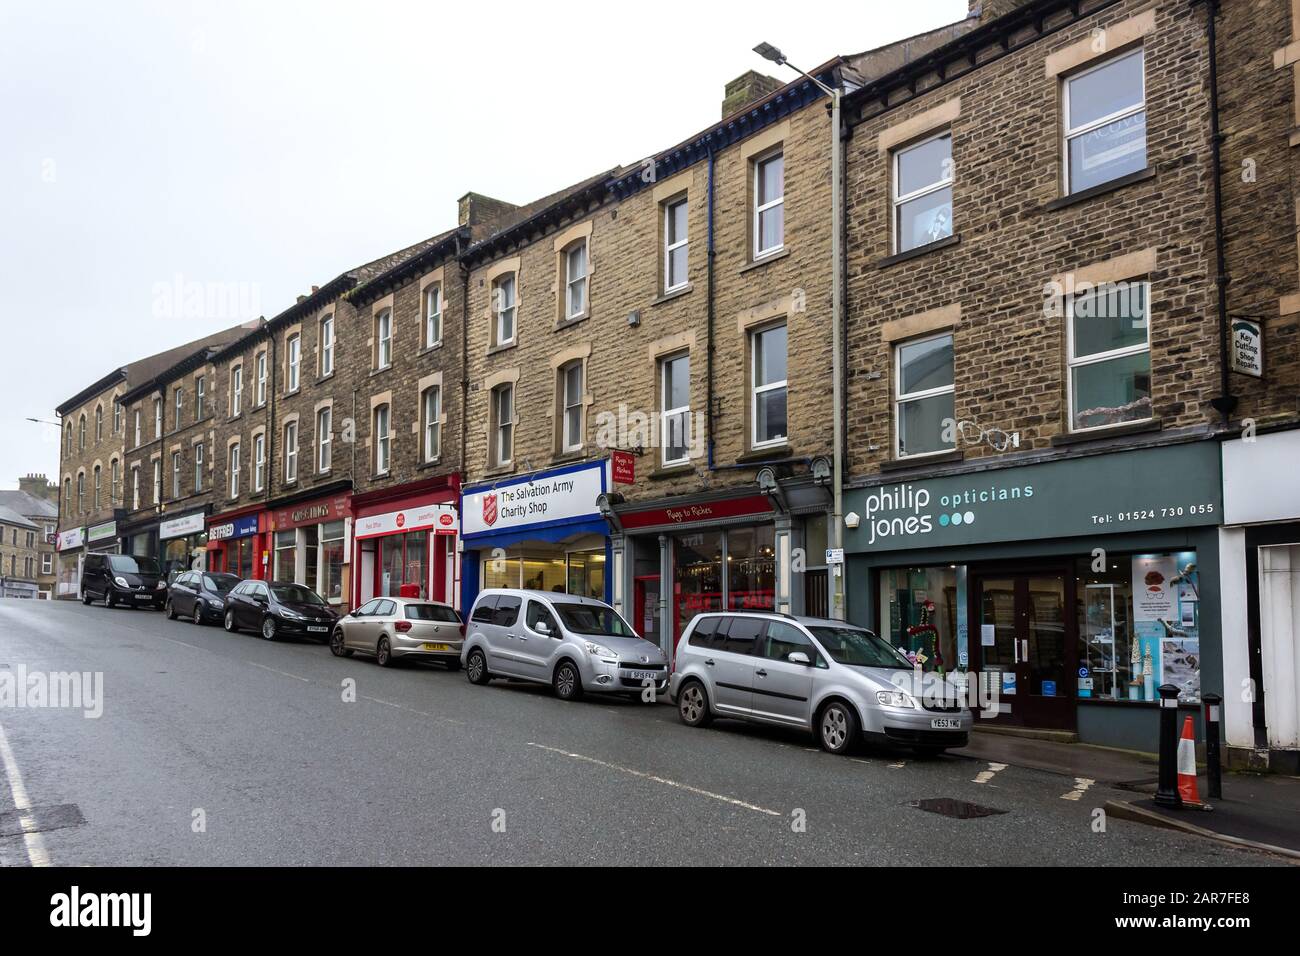 Shops and stores on Market street, Carnforth, Lancashire Stock Photo